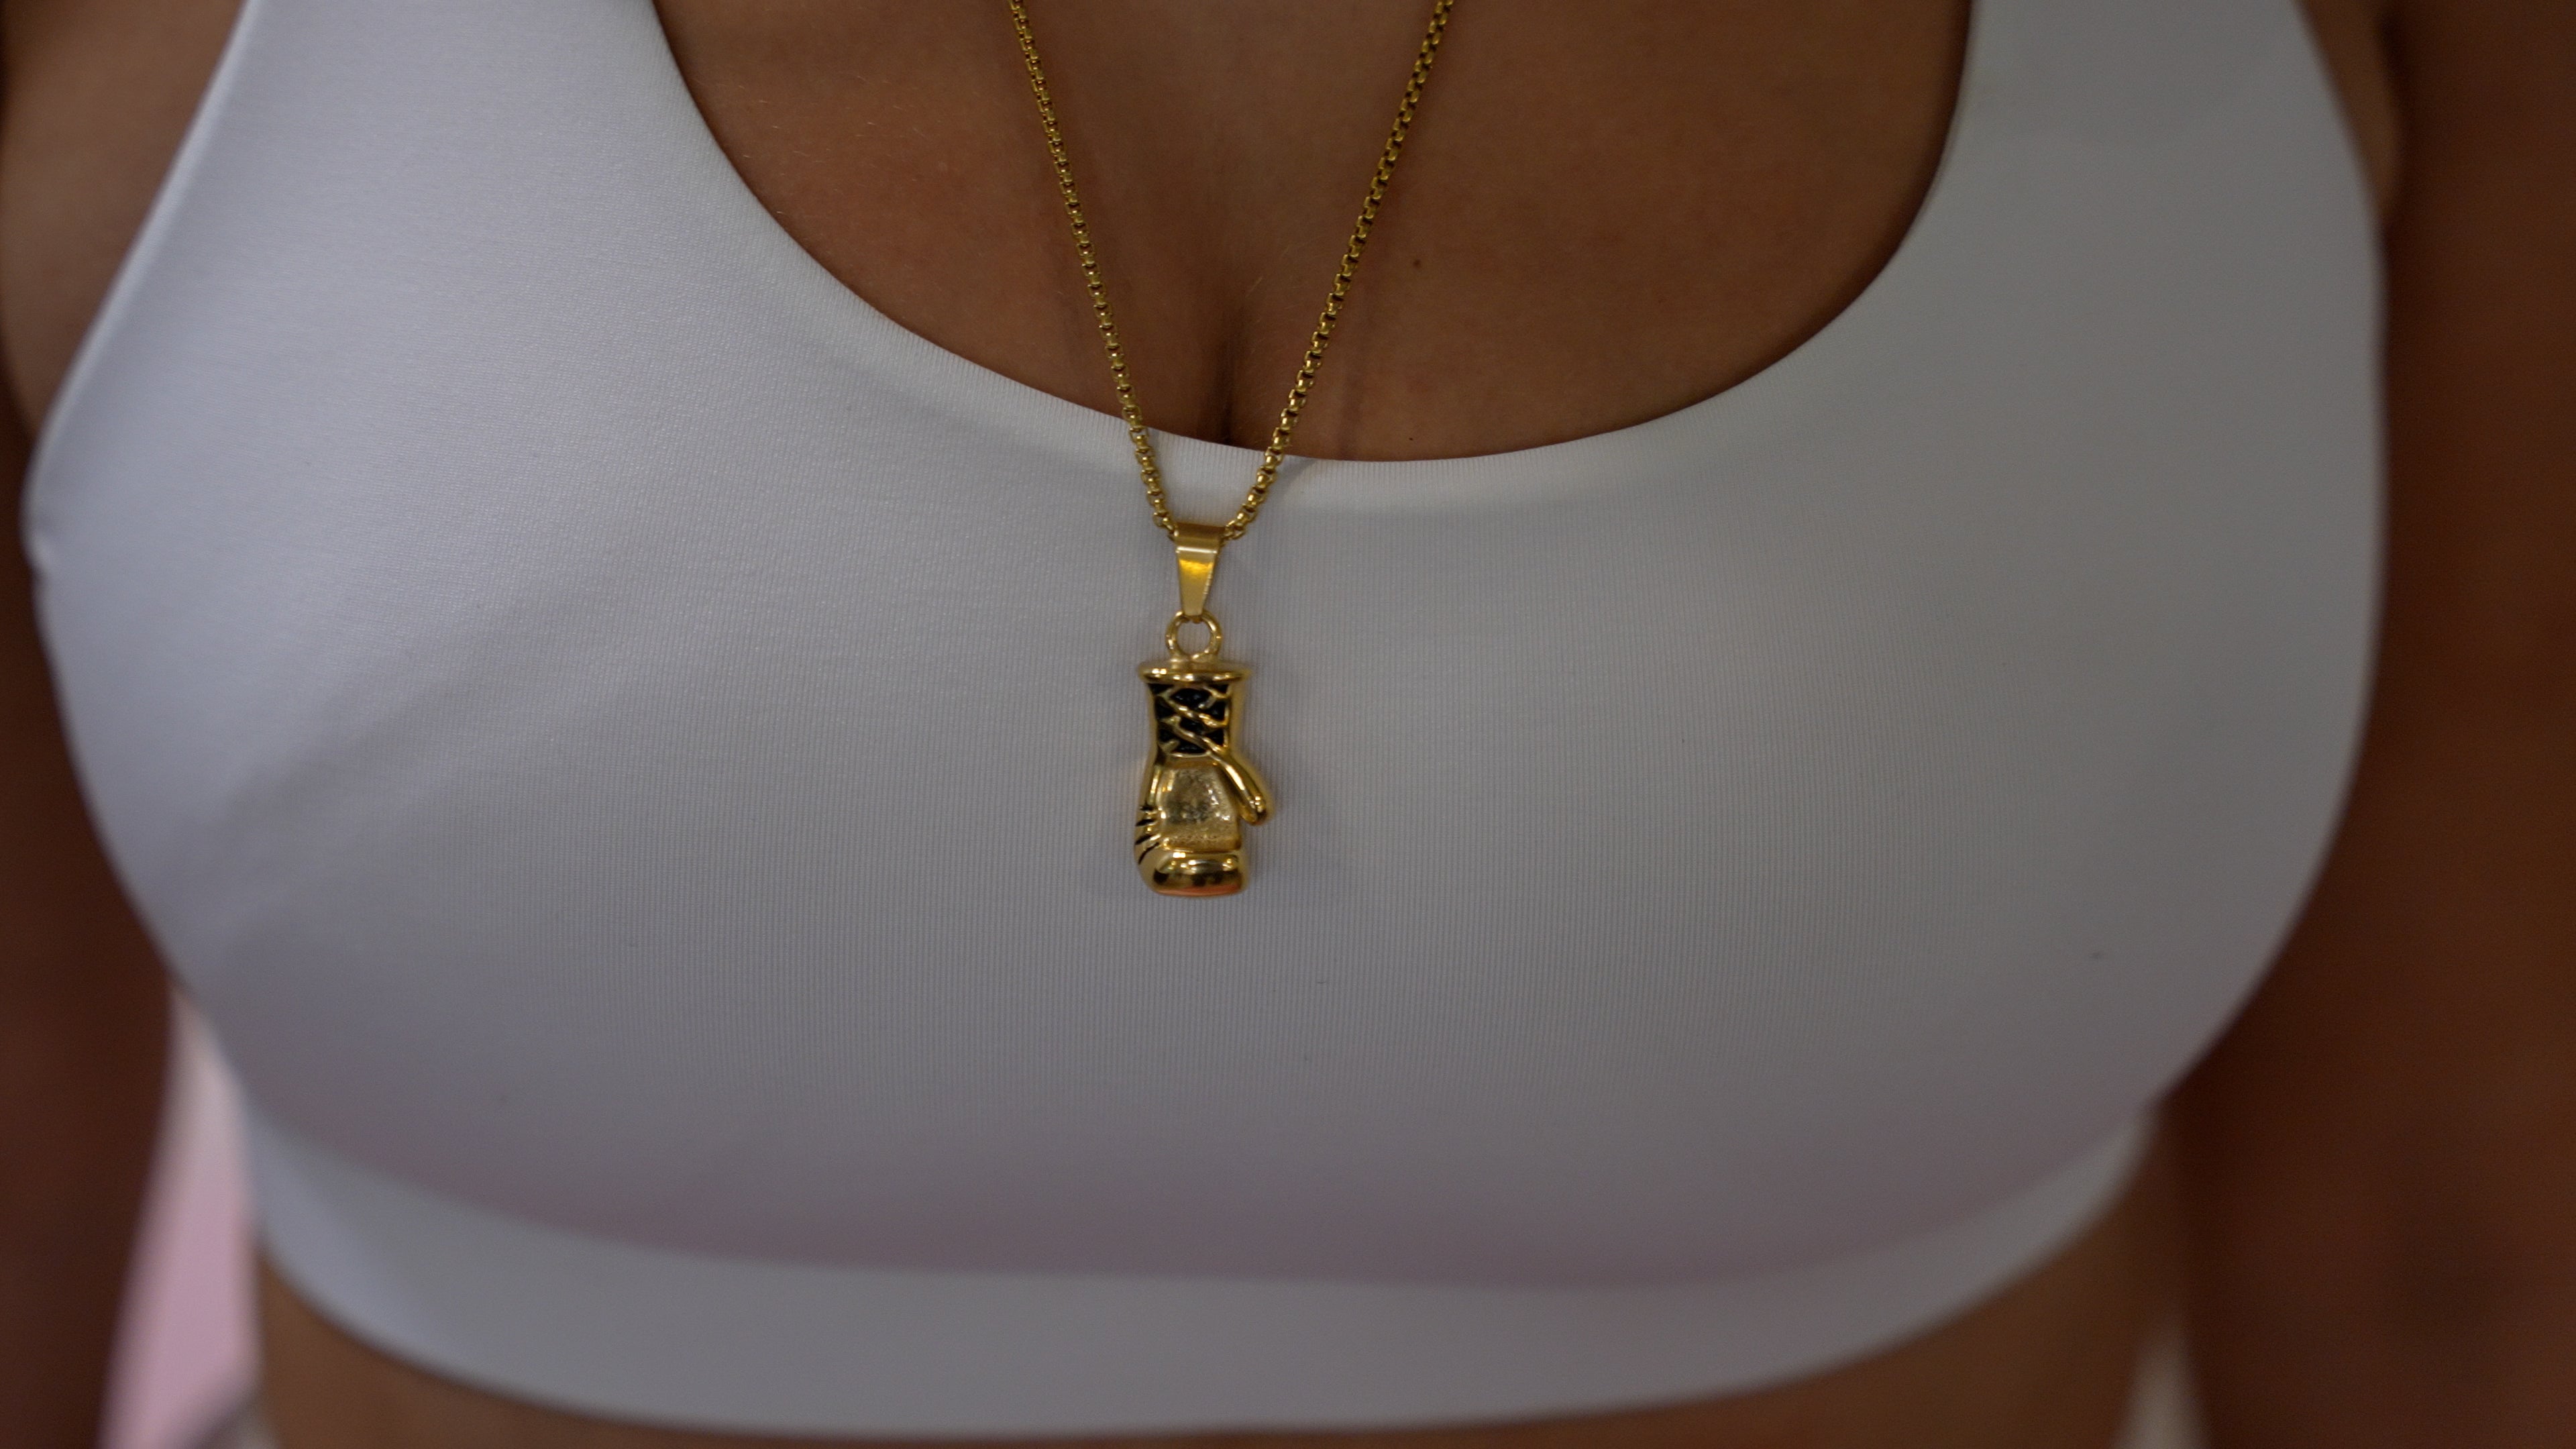 The Boxer Necklace